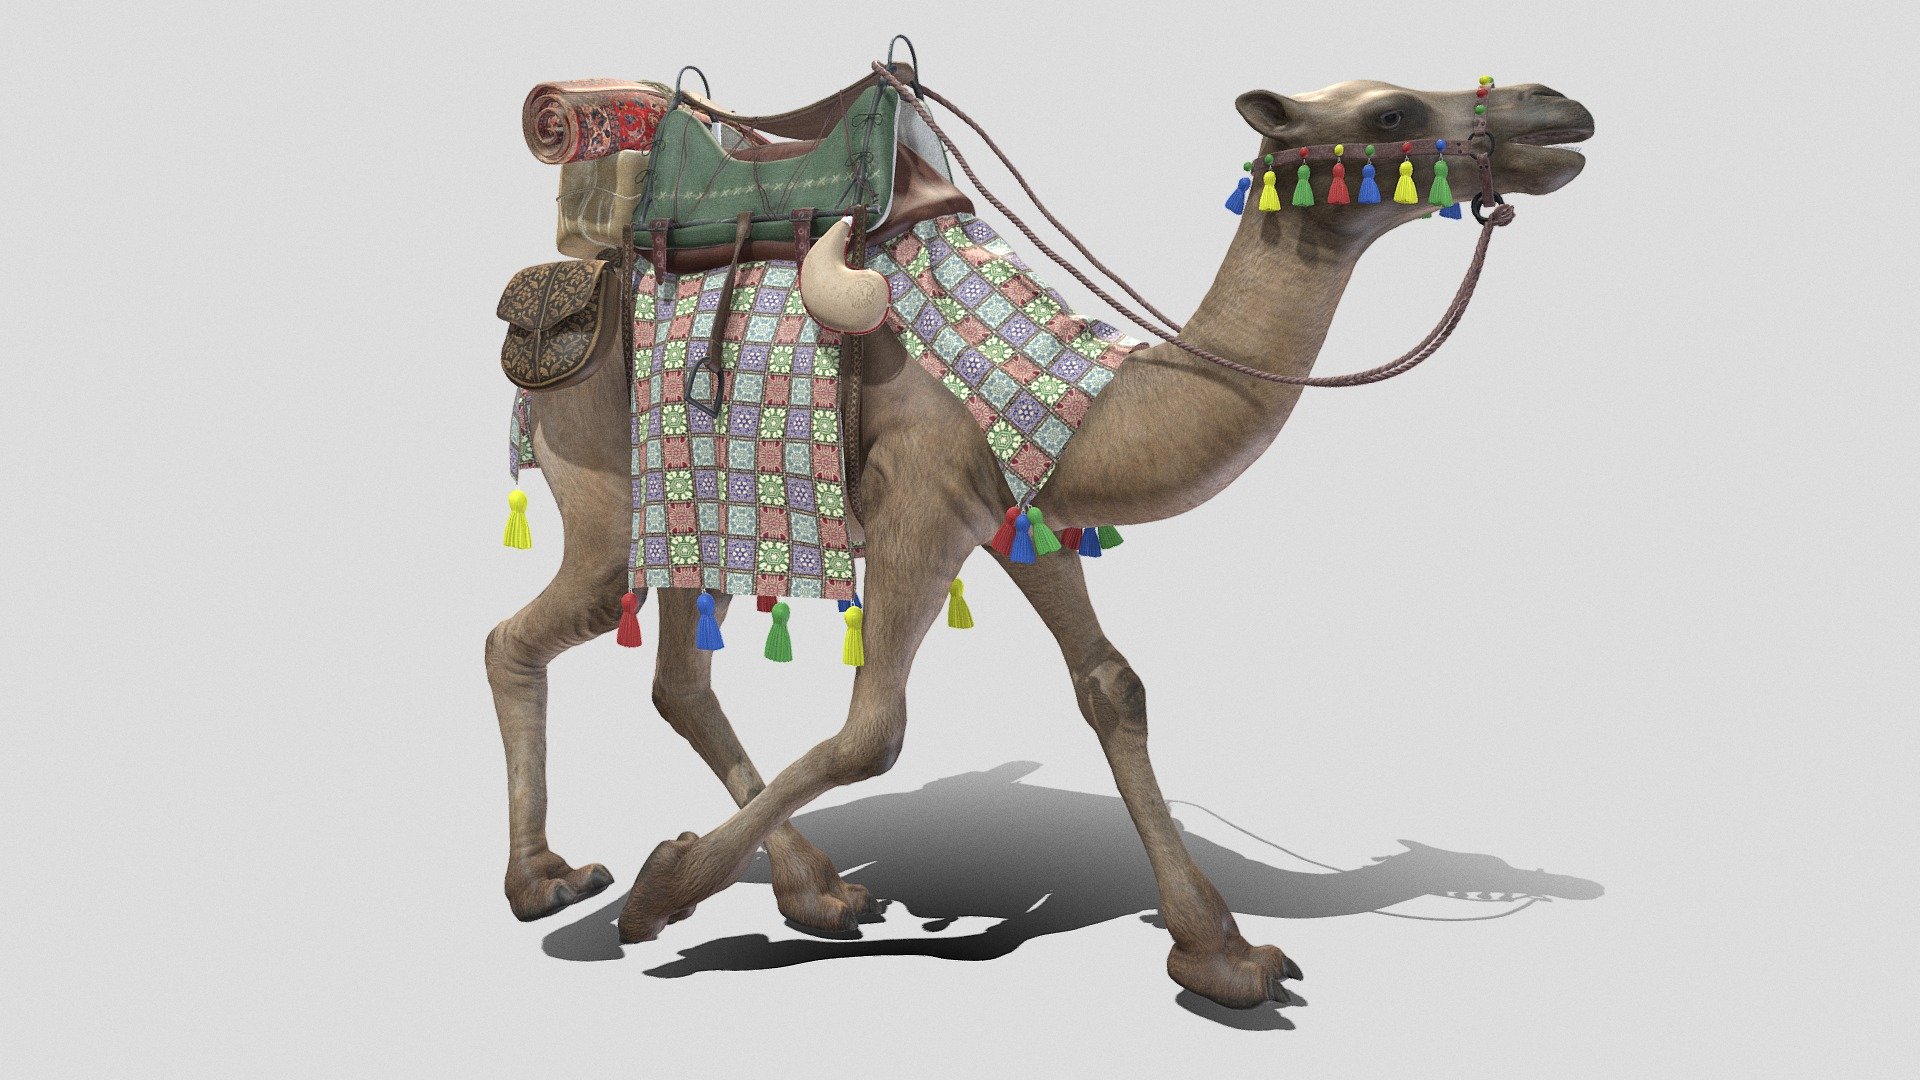 Camel with saddle rigged and animated

Walk loop animation - Camel with saddle rigged and animated - 3D model by Mahmoud.Moh 3d model